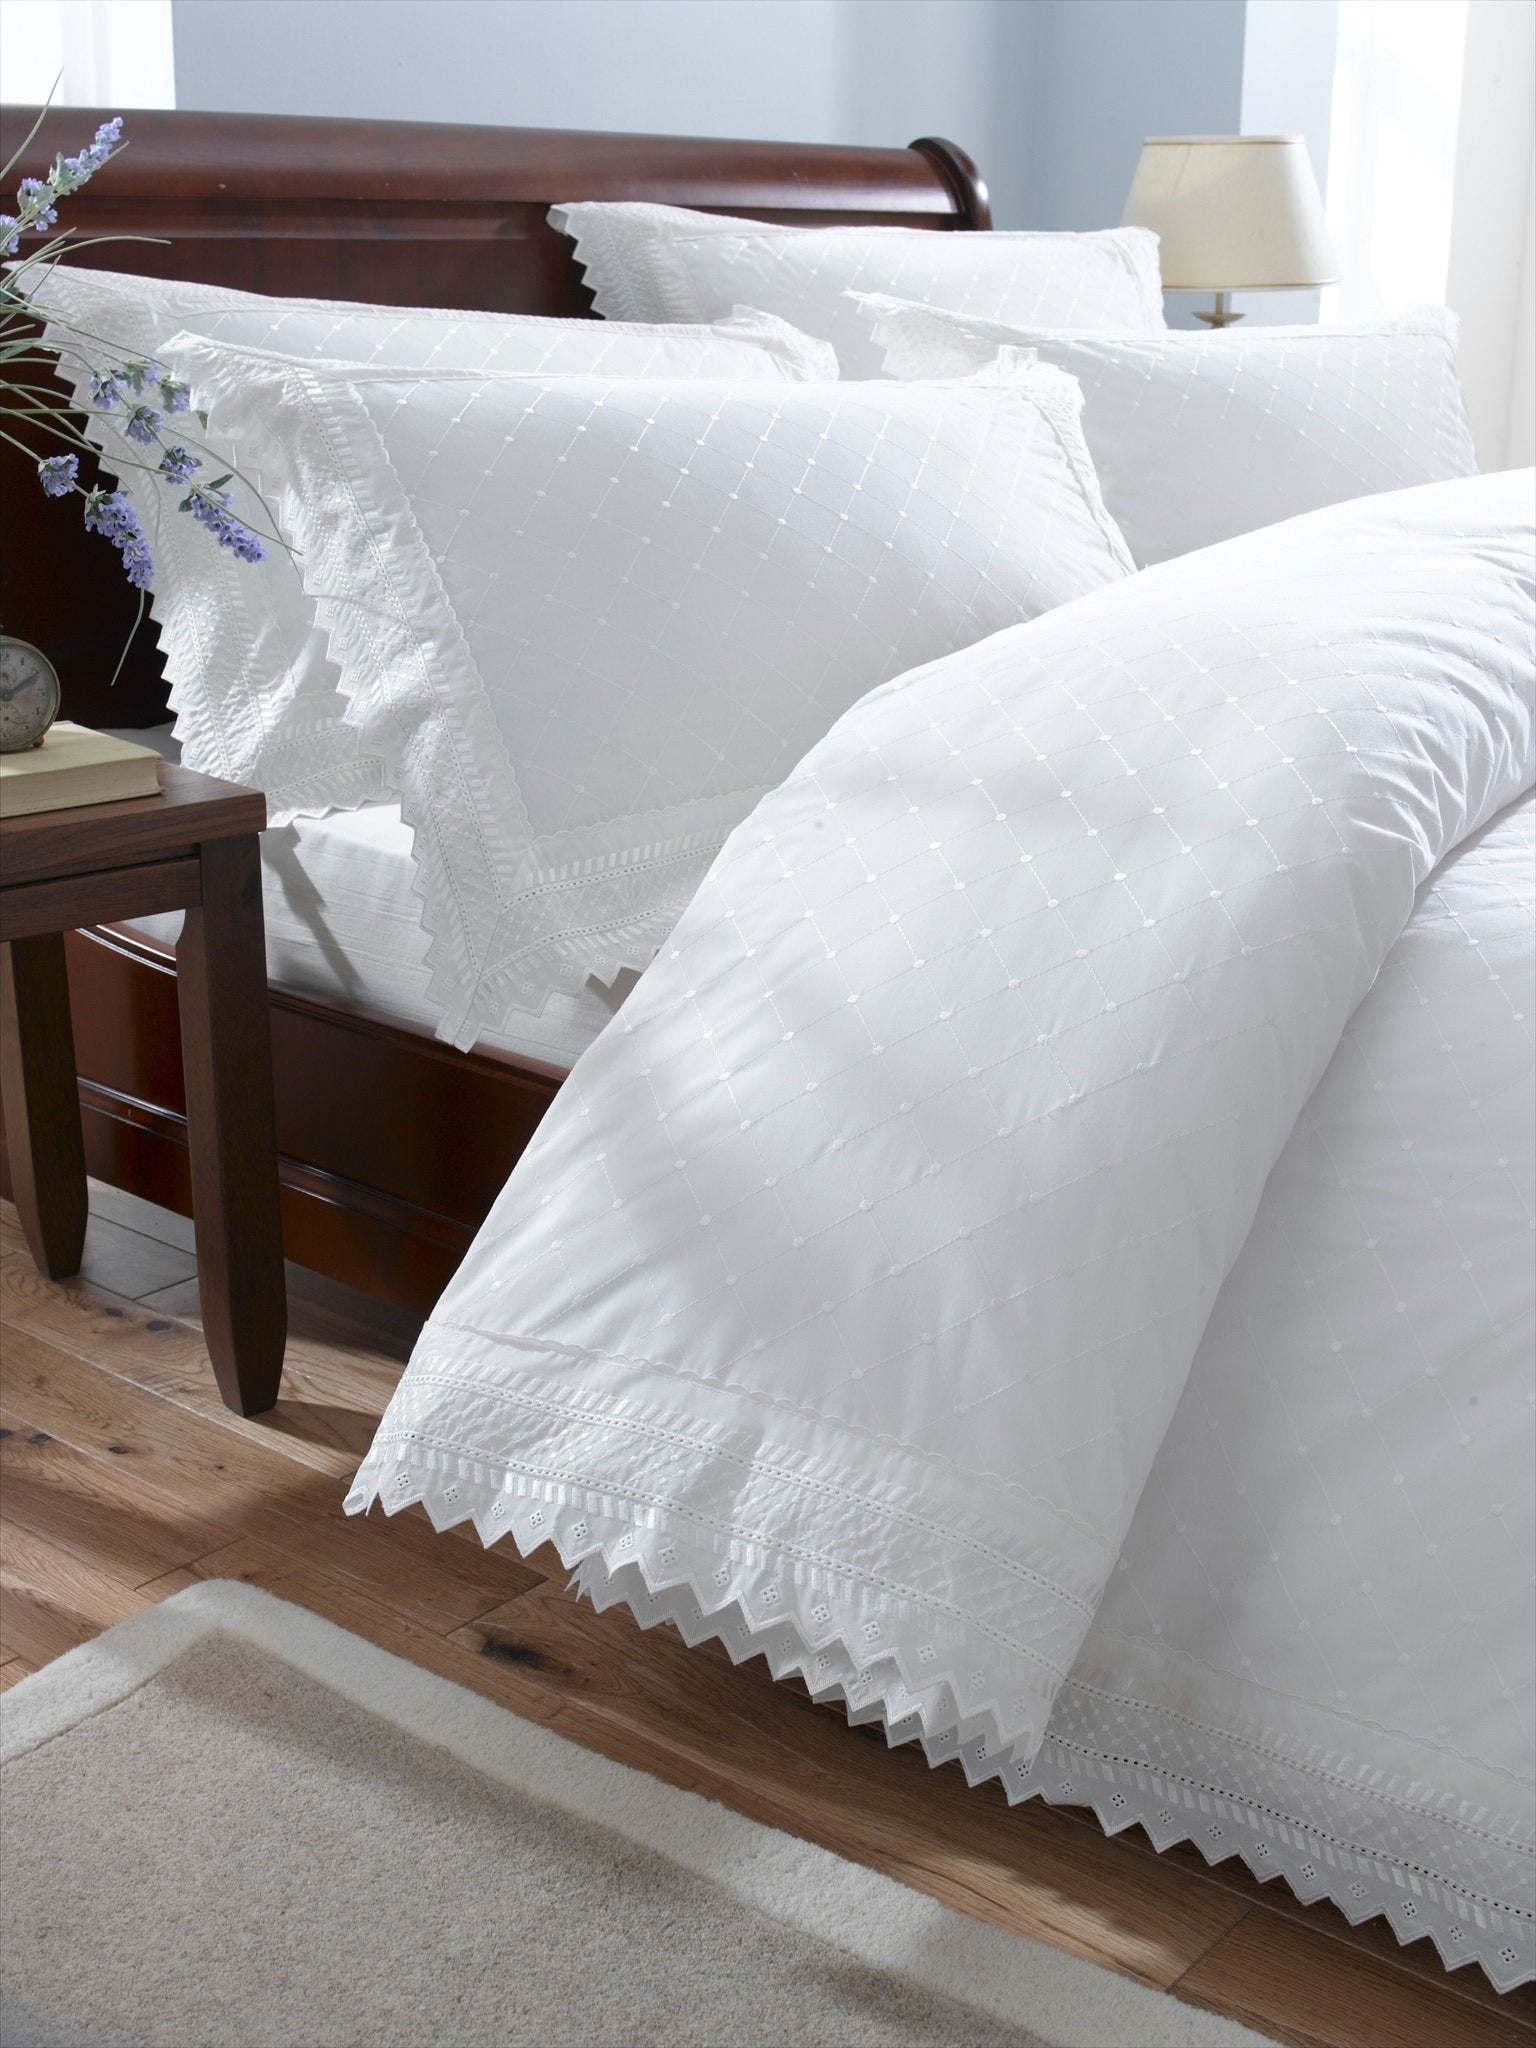 Balmoral Broderie Anglais Percale Duvet Cover Bed Set, White, King,, PBAD3N